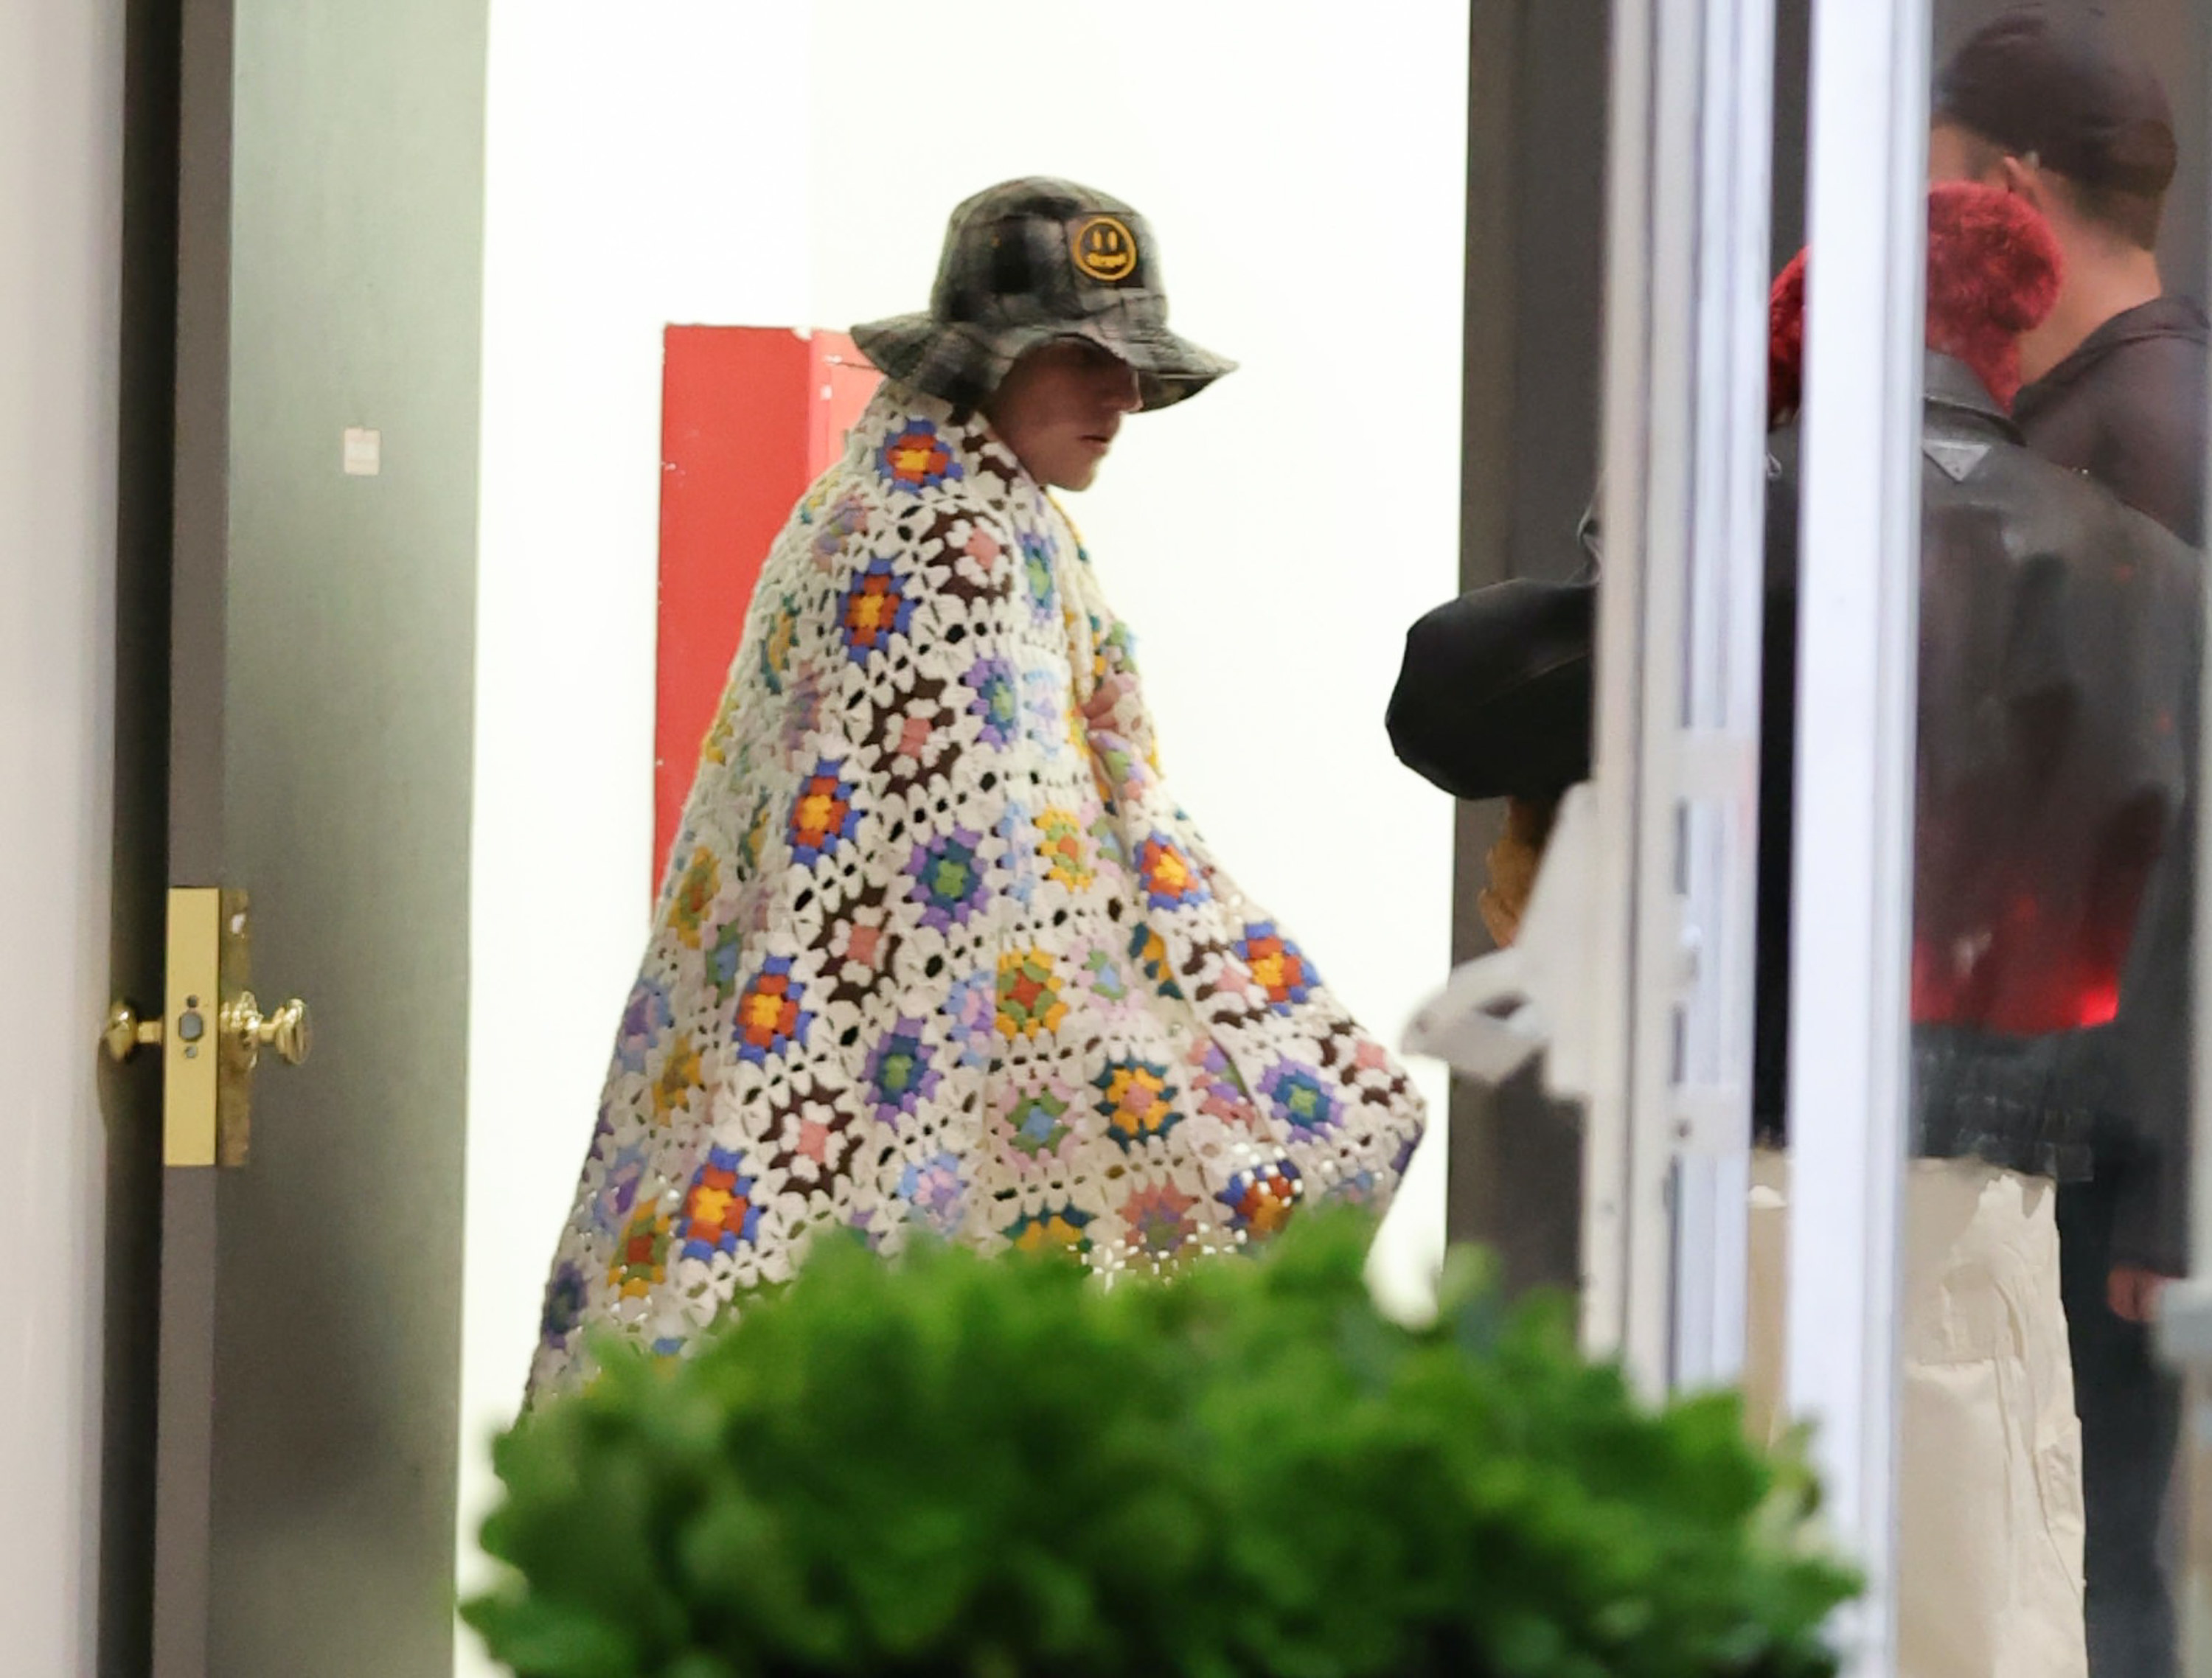 Justin Bieber wearing a blanket out in public